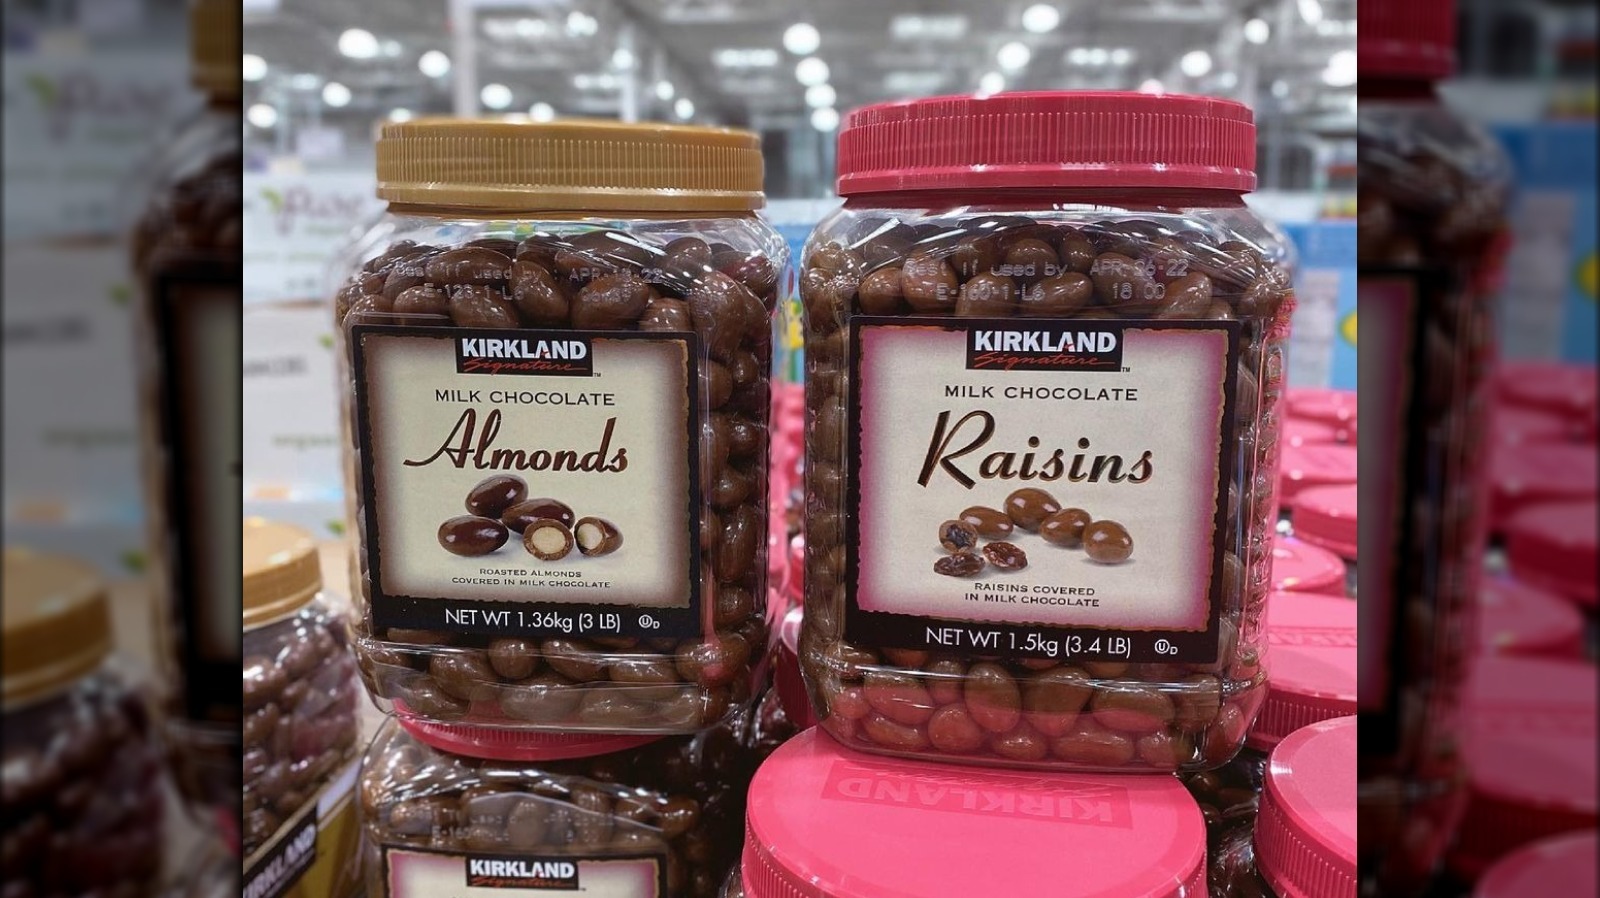 Craving chocolate? Head to Costco and grab a jars of M&M's